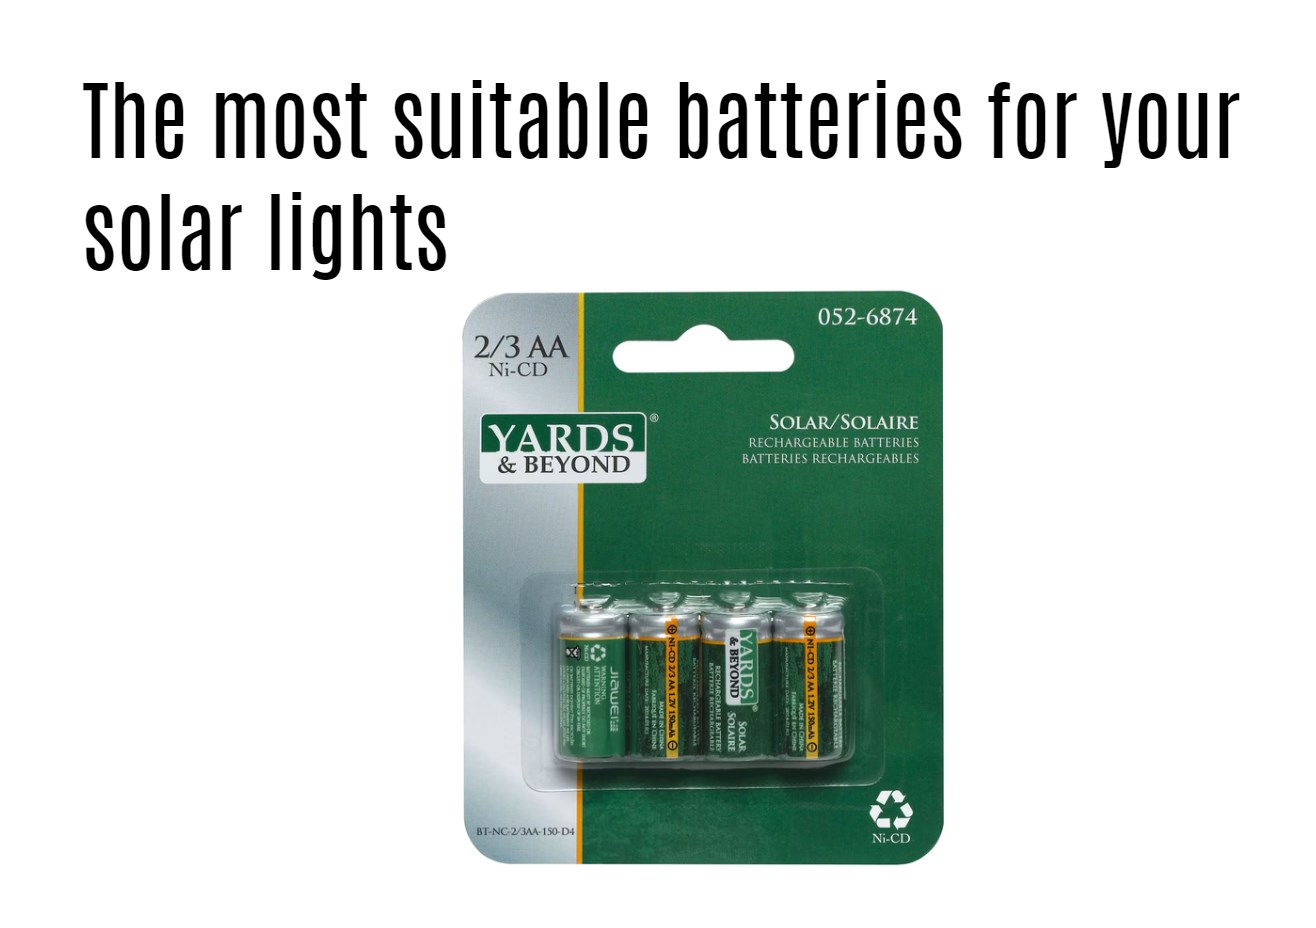 The most suitable batteries for your solar lights